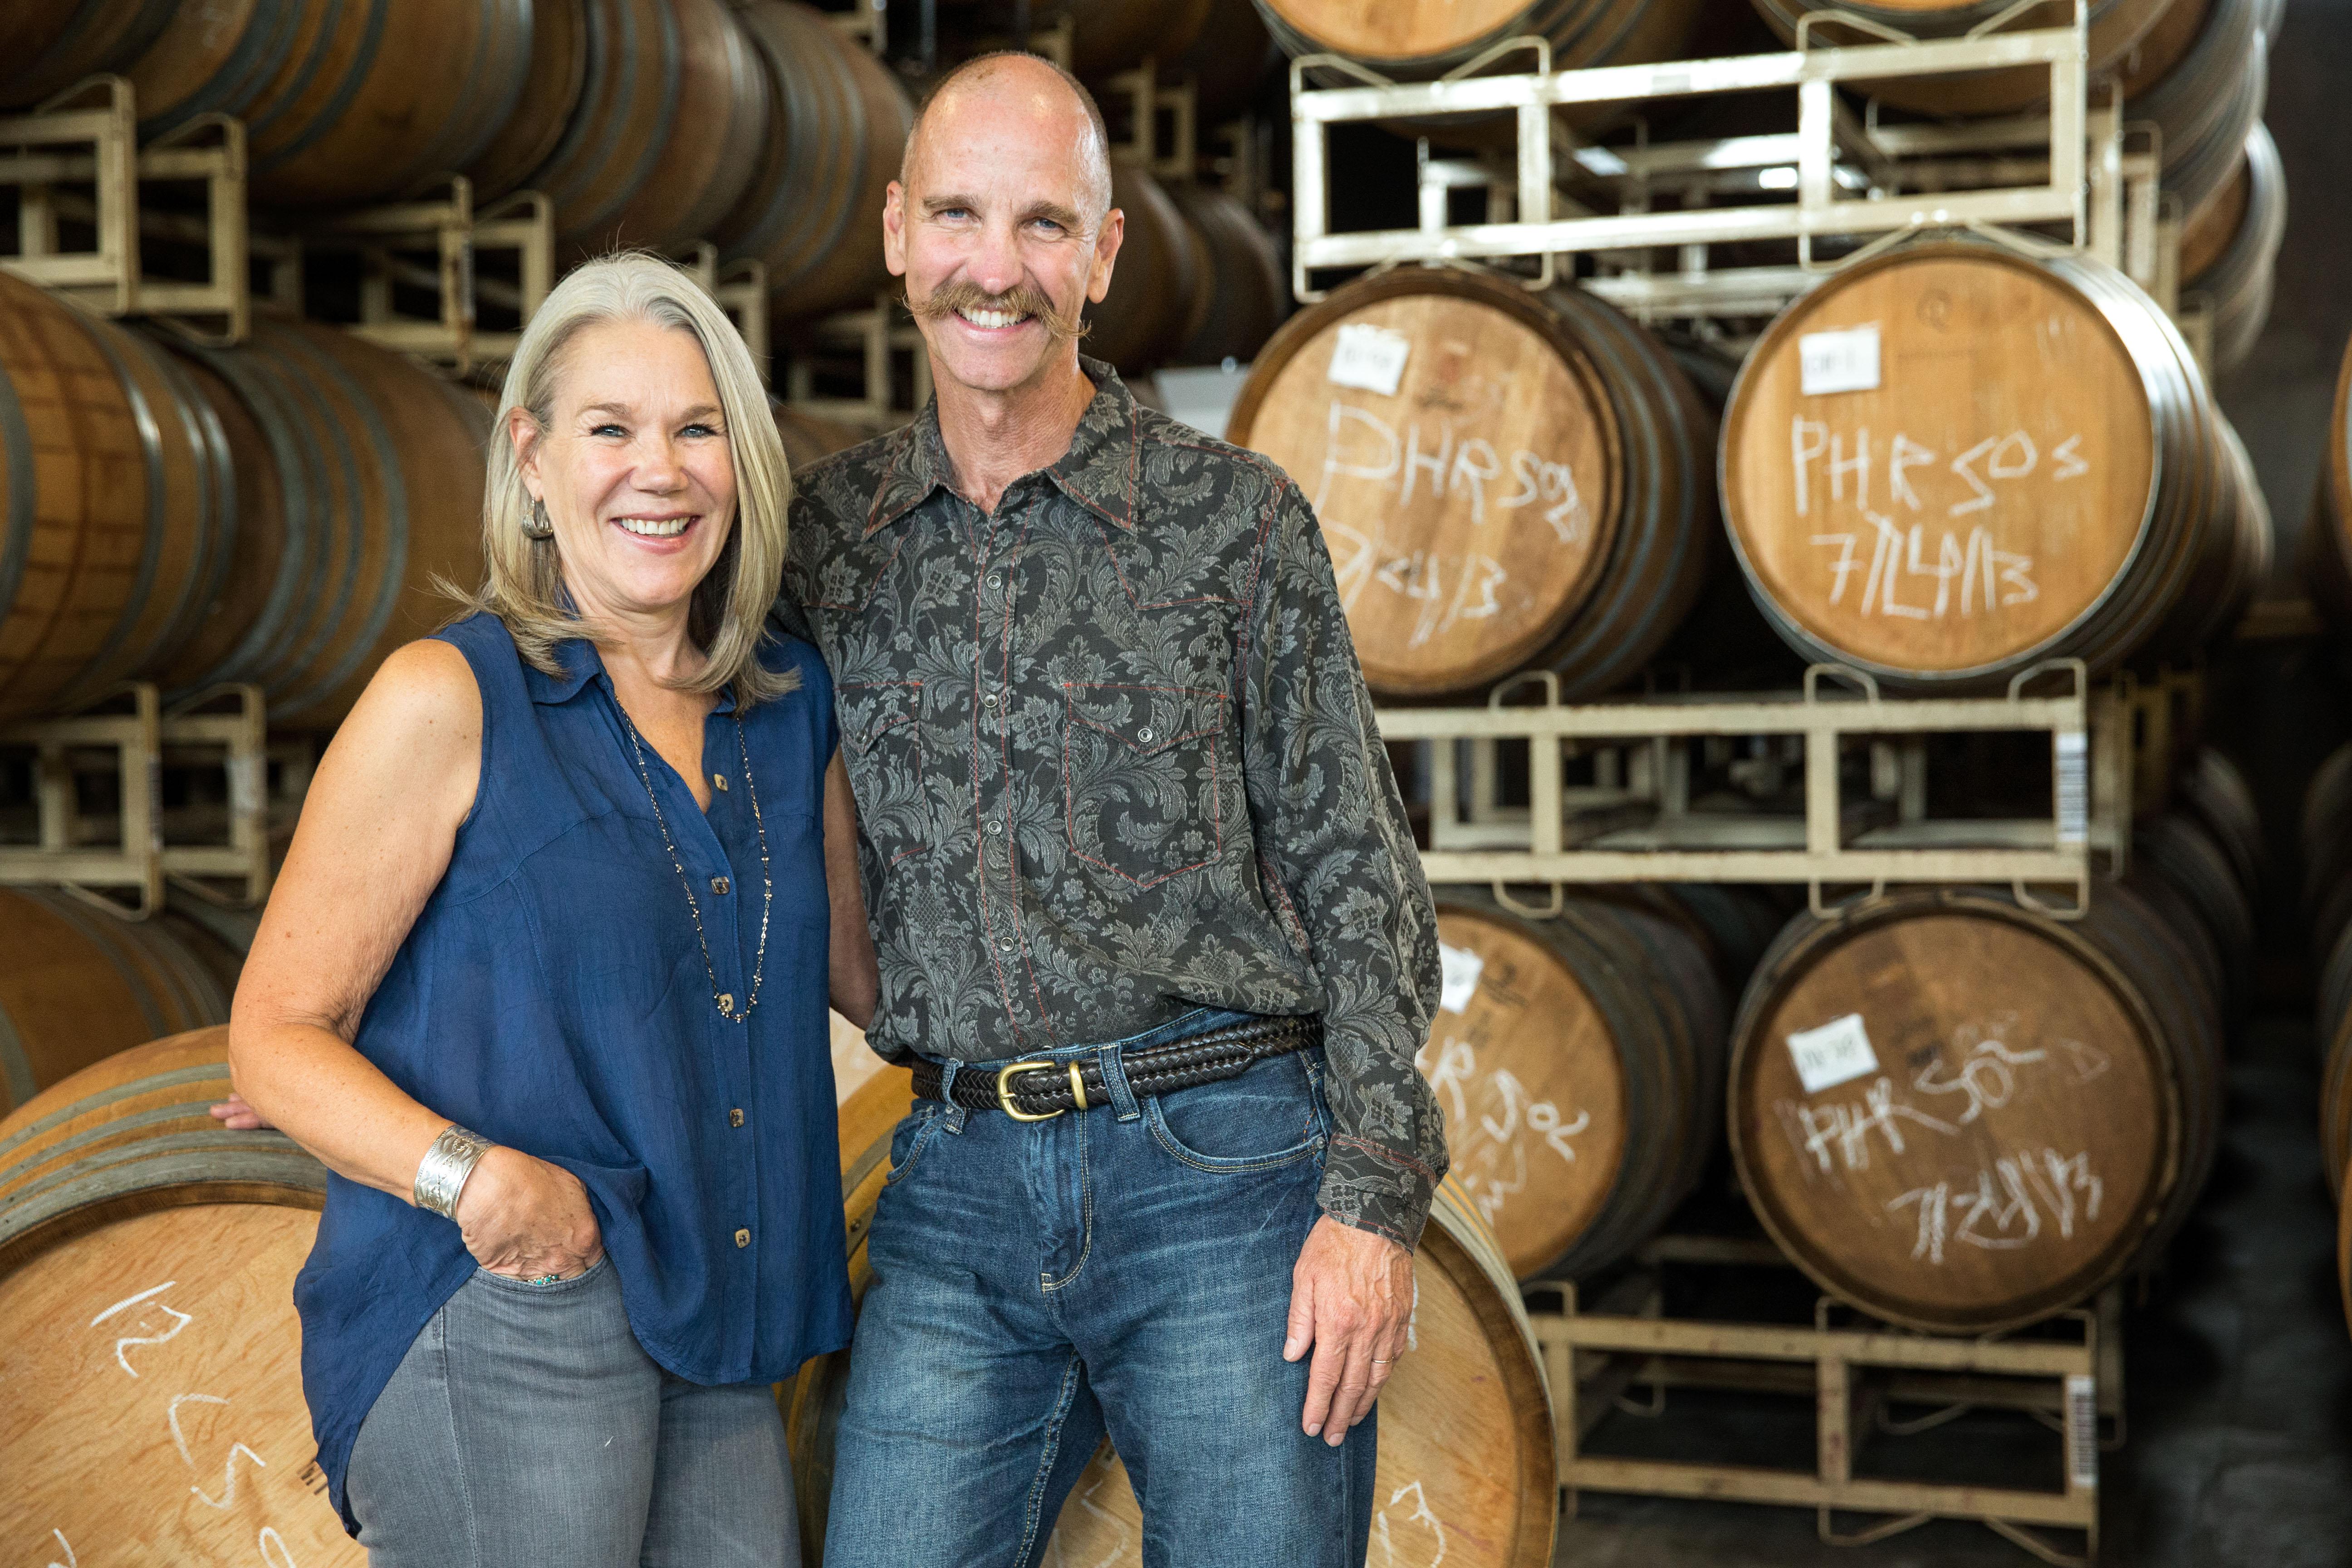 two people smile while posting in front of barrels in a wine cellar